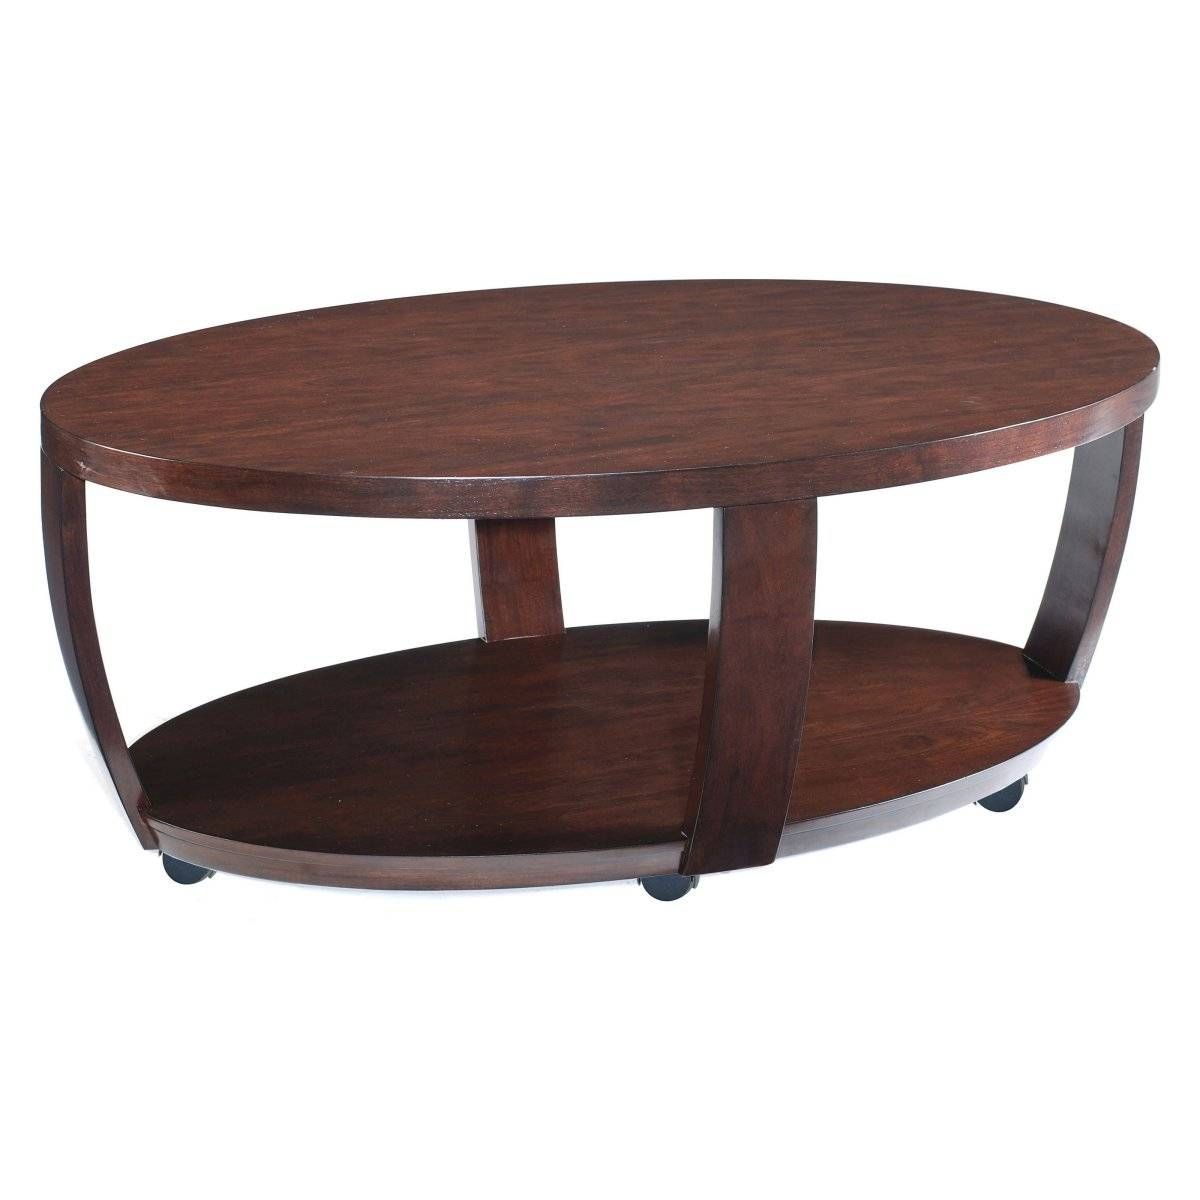 Furniture: Marble Round Coffee Table | Contemporary Coffee Table Inside Contemporary Coffee Table Sets (View 23 of 30)